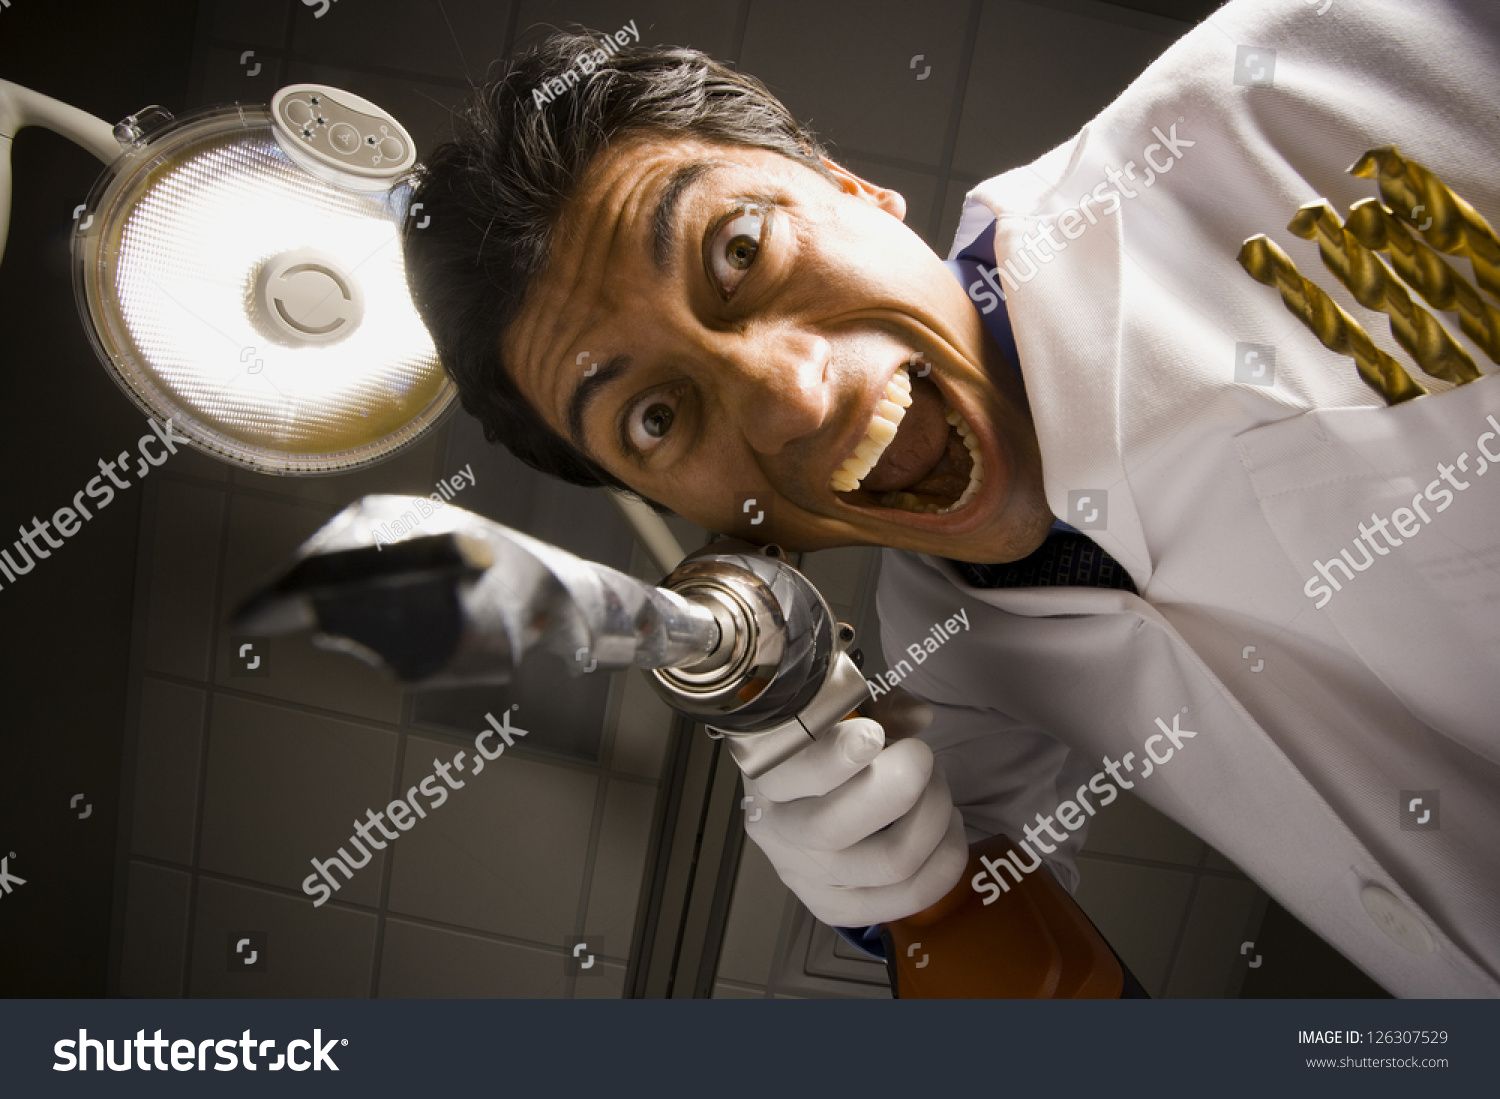 stock-photo-portrait-of-crazy-dentist-with-drill-126307529.jpg